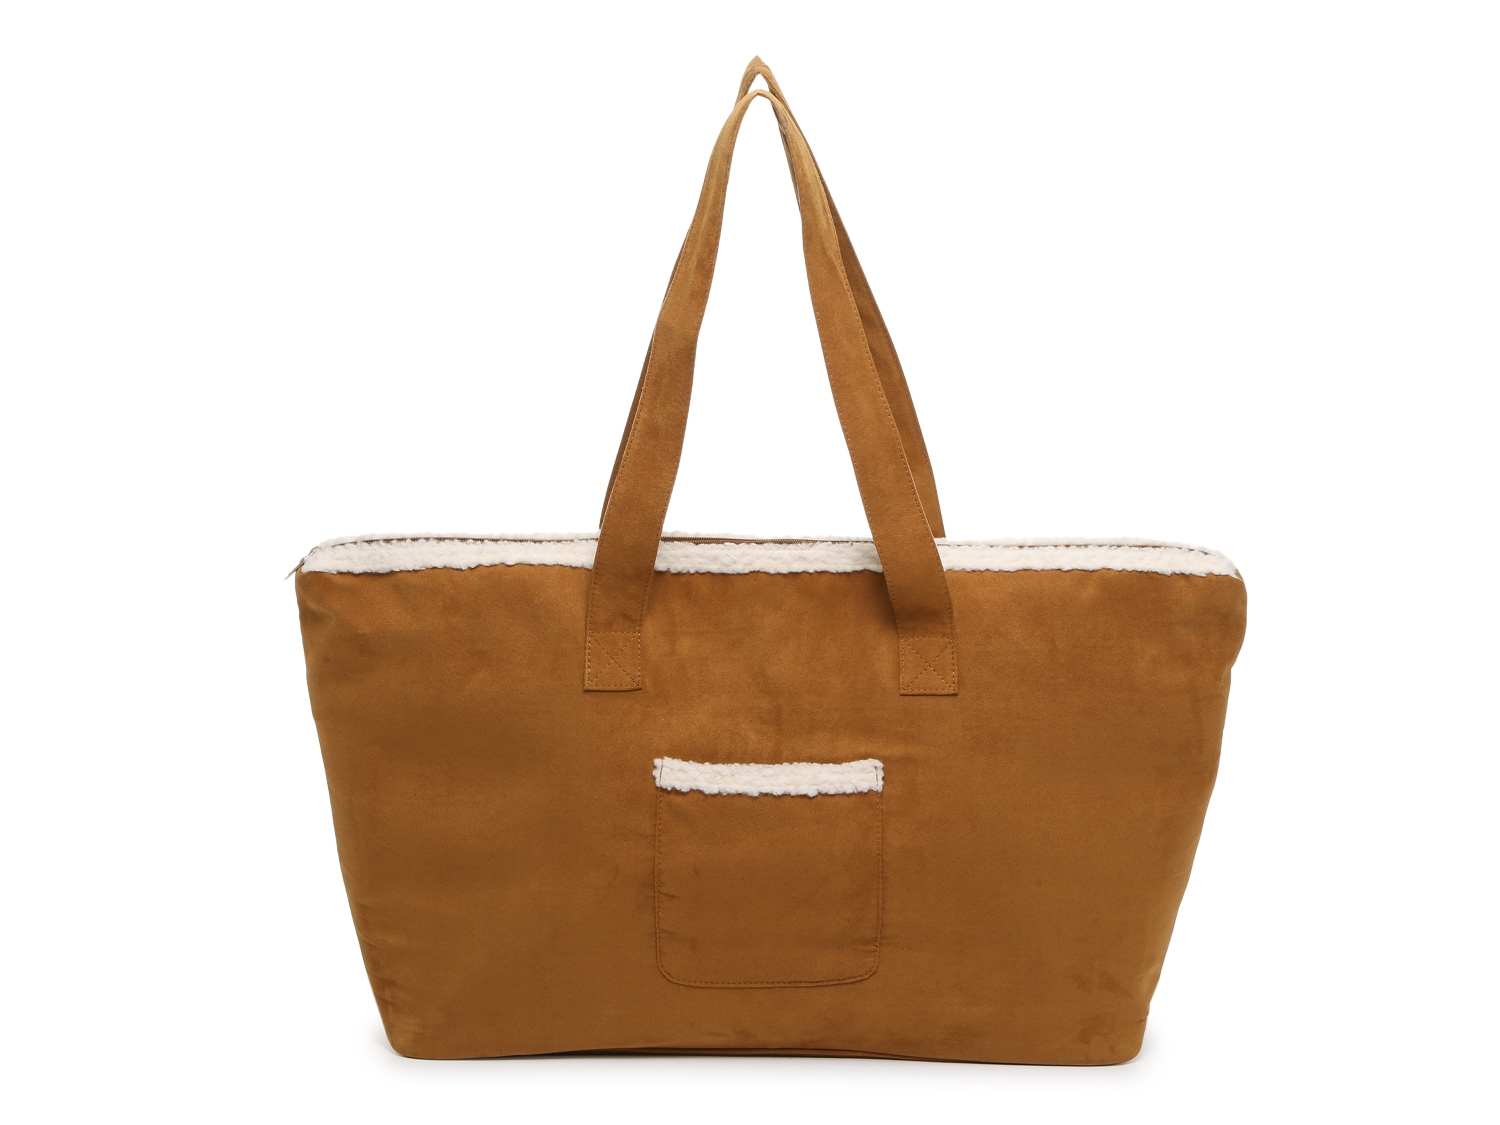 DSW Exclusive Free Weekender Bag Free Shipping DSW